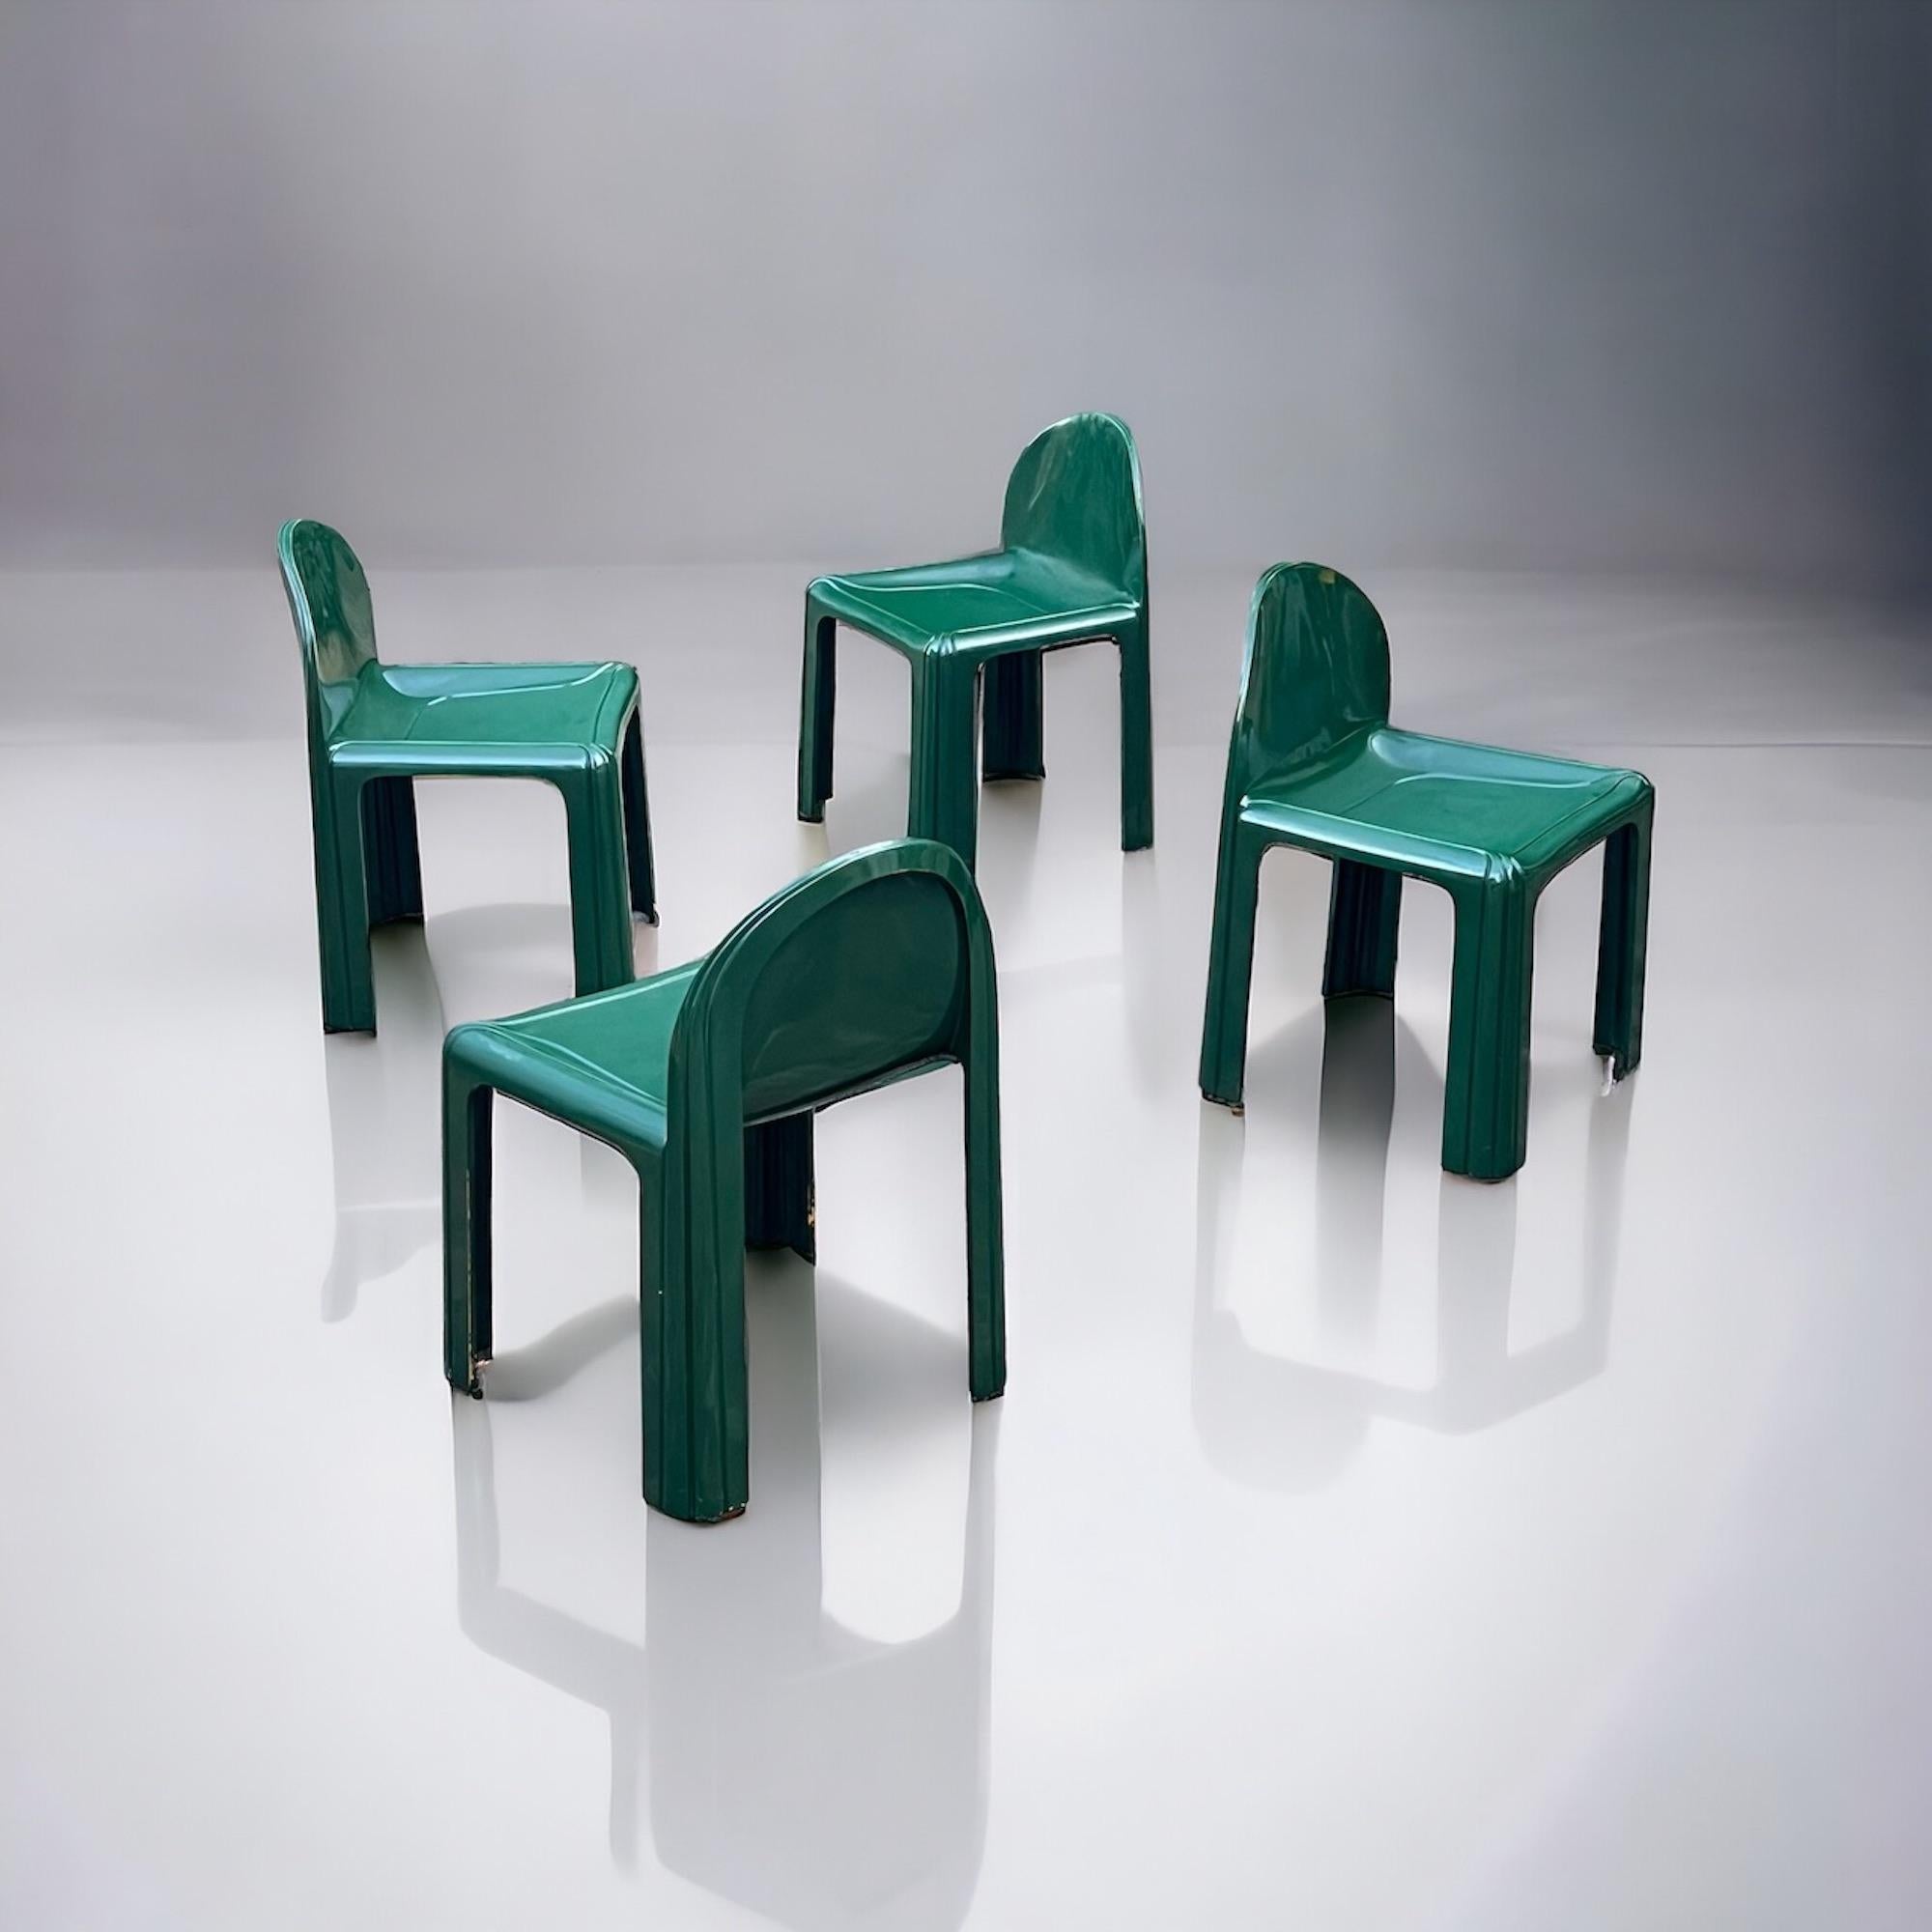 Set of 4 Green Resin Kartell Model 4854 Chairs by Gae Aulenti, 1960s For Sale 1